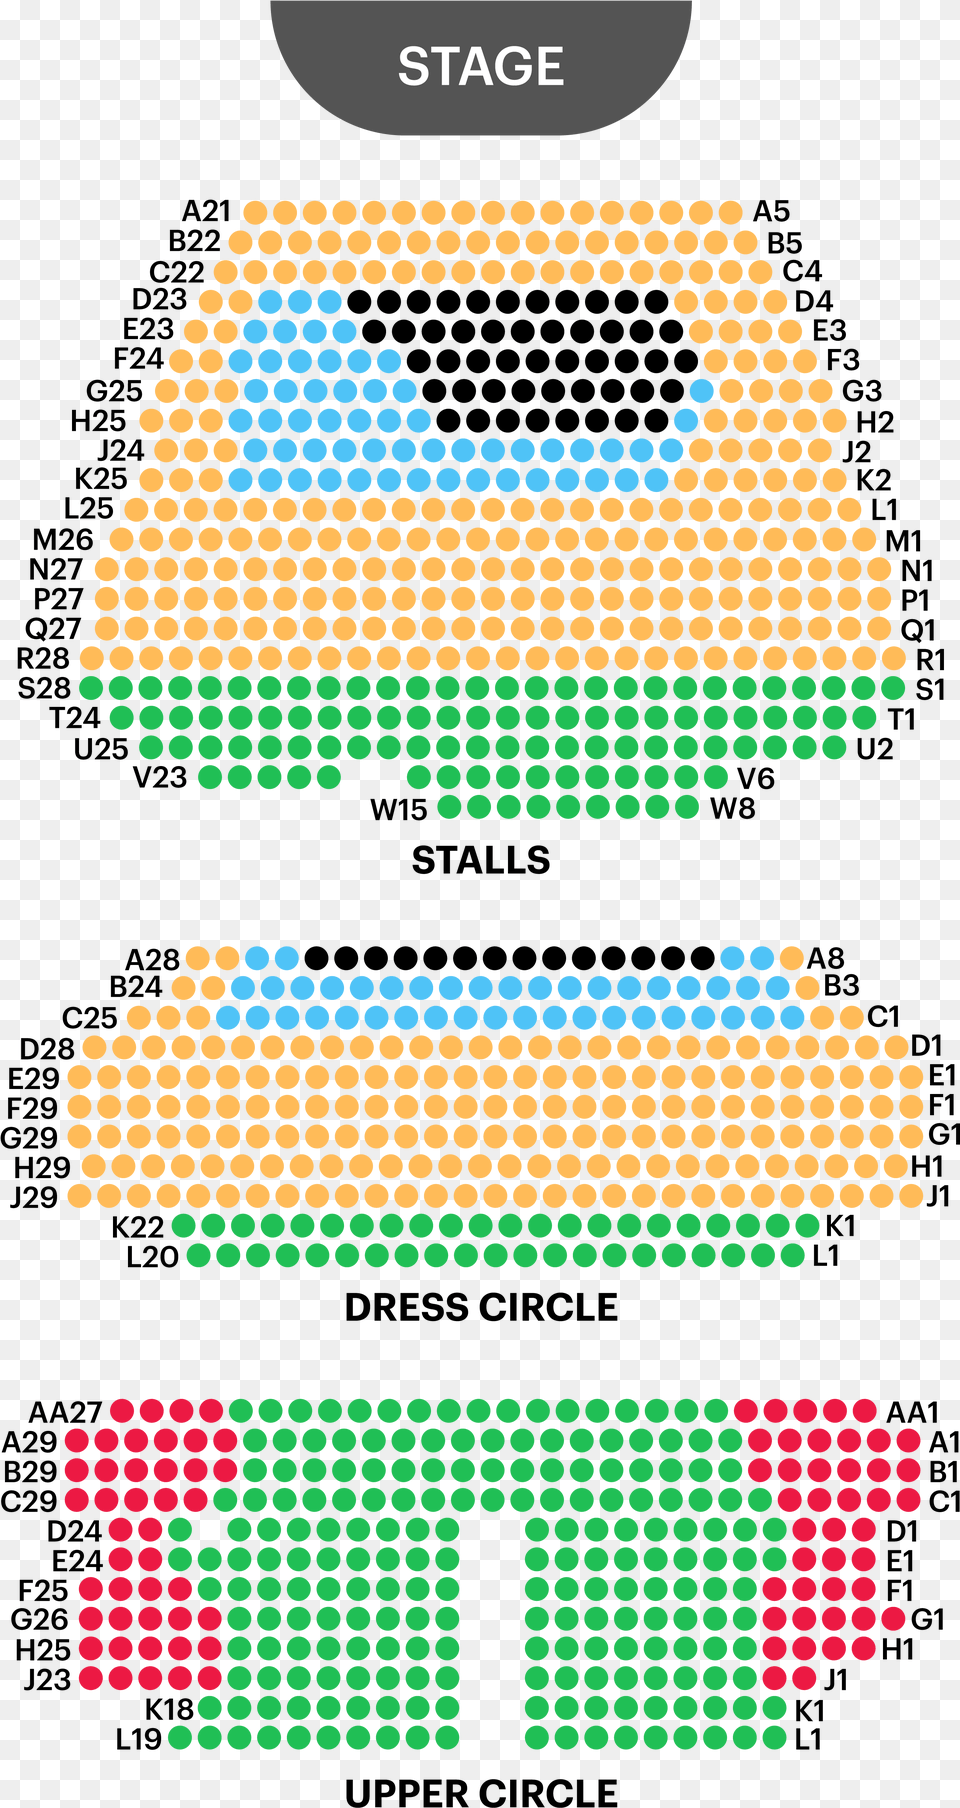 Queens Theatre Seating Map Layout Wyndham39s Theatre Seating Plan Free Png